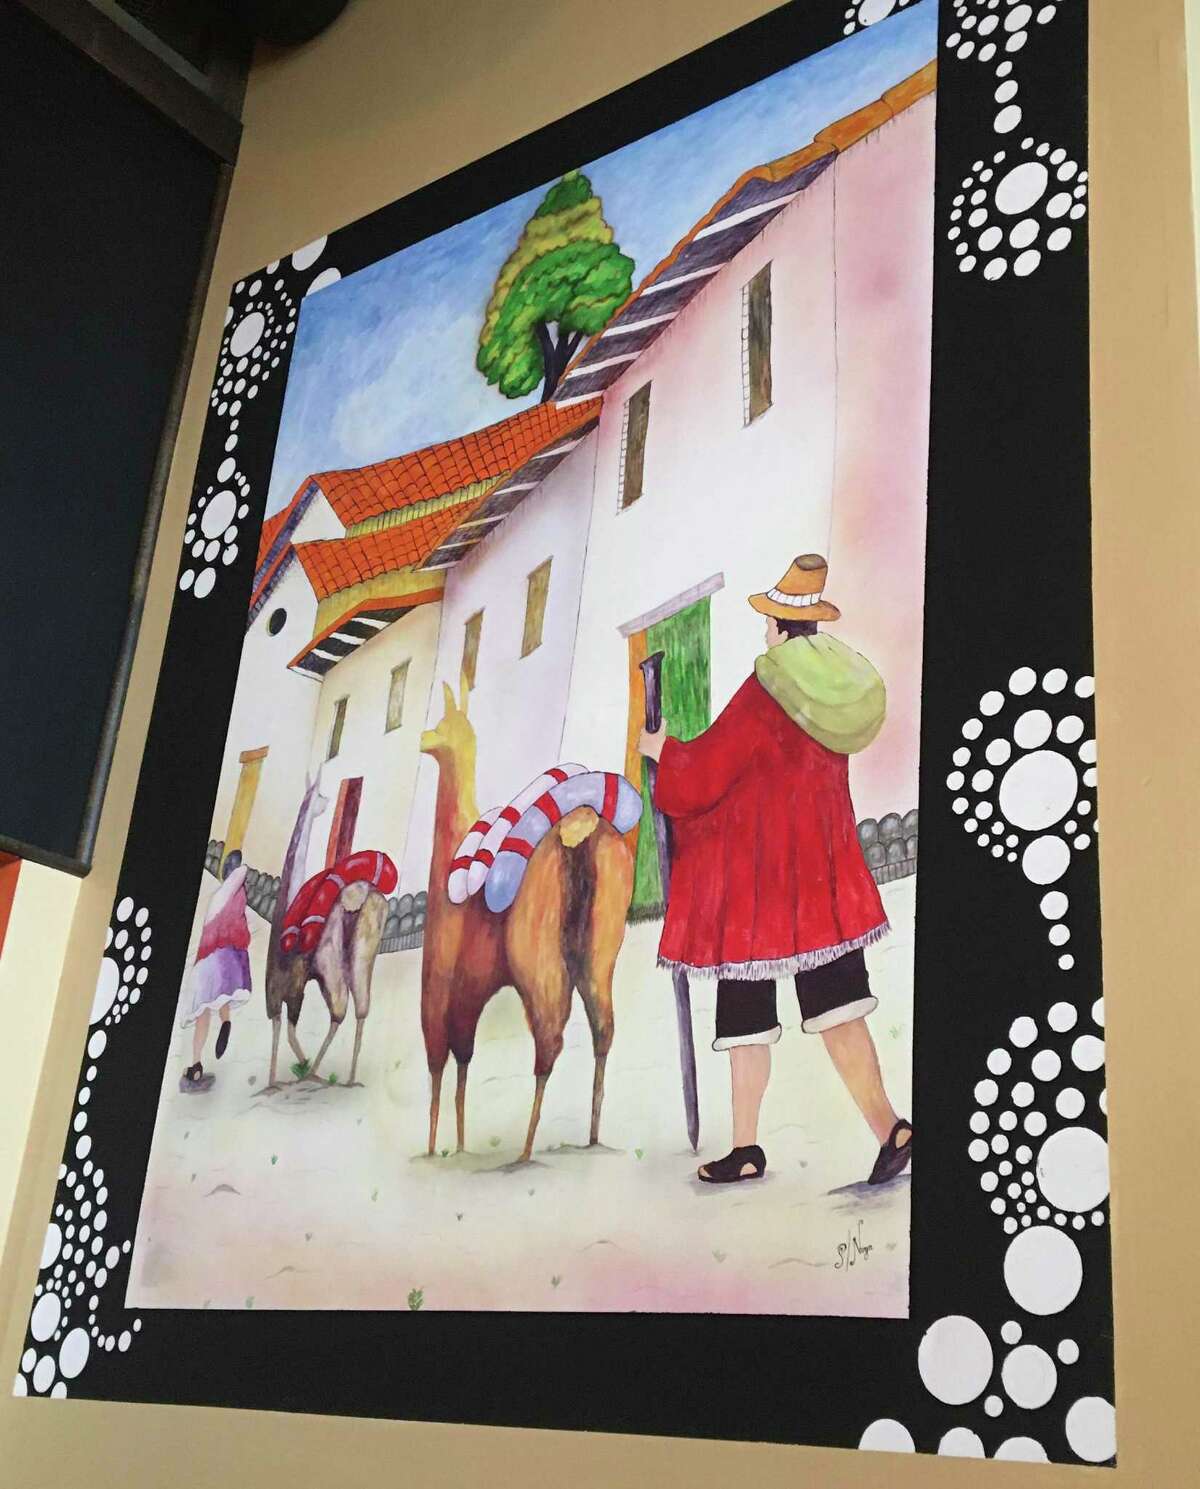 A painting of a scene from a village in the mountains outside of Cusco, Peru on the wall of Chacra Peruvian Cuisine & Pisco Bar, which will open in July 2022 at 152 Temple St. in downtown New Haven. The painting is by Pablo Nugra, an Ecuadorian artist who is the brother-in-law of Chacra owner Walter Vera.